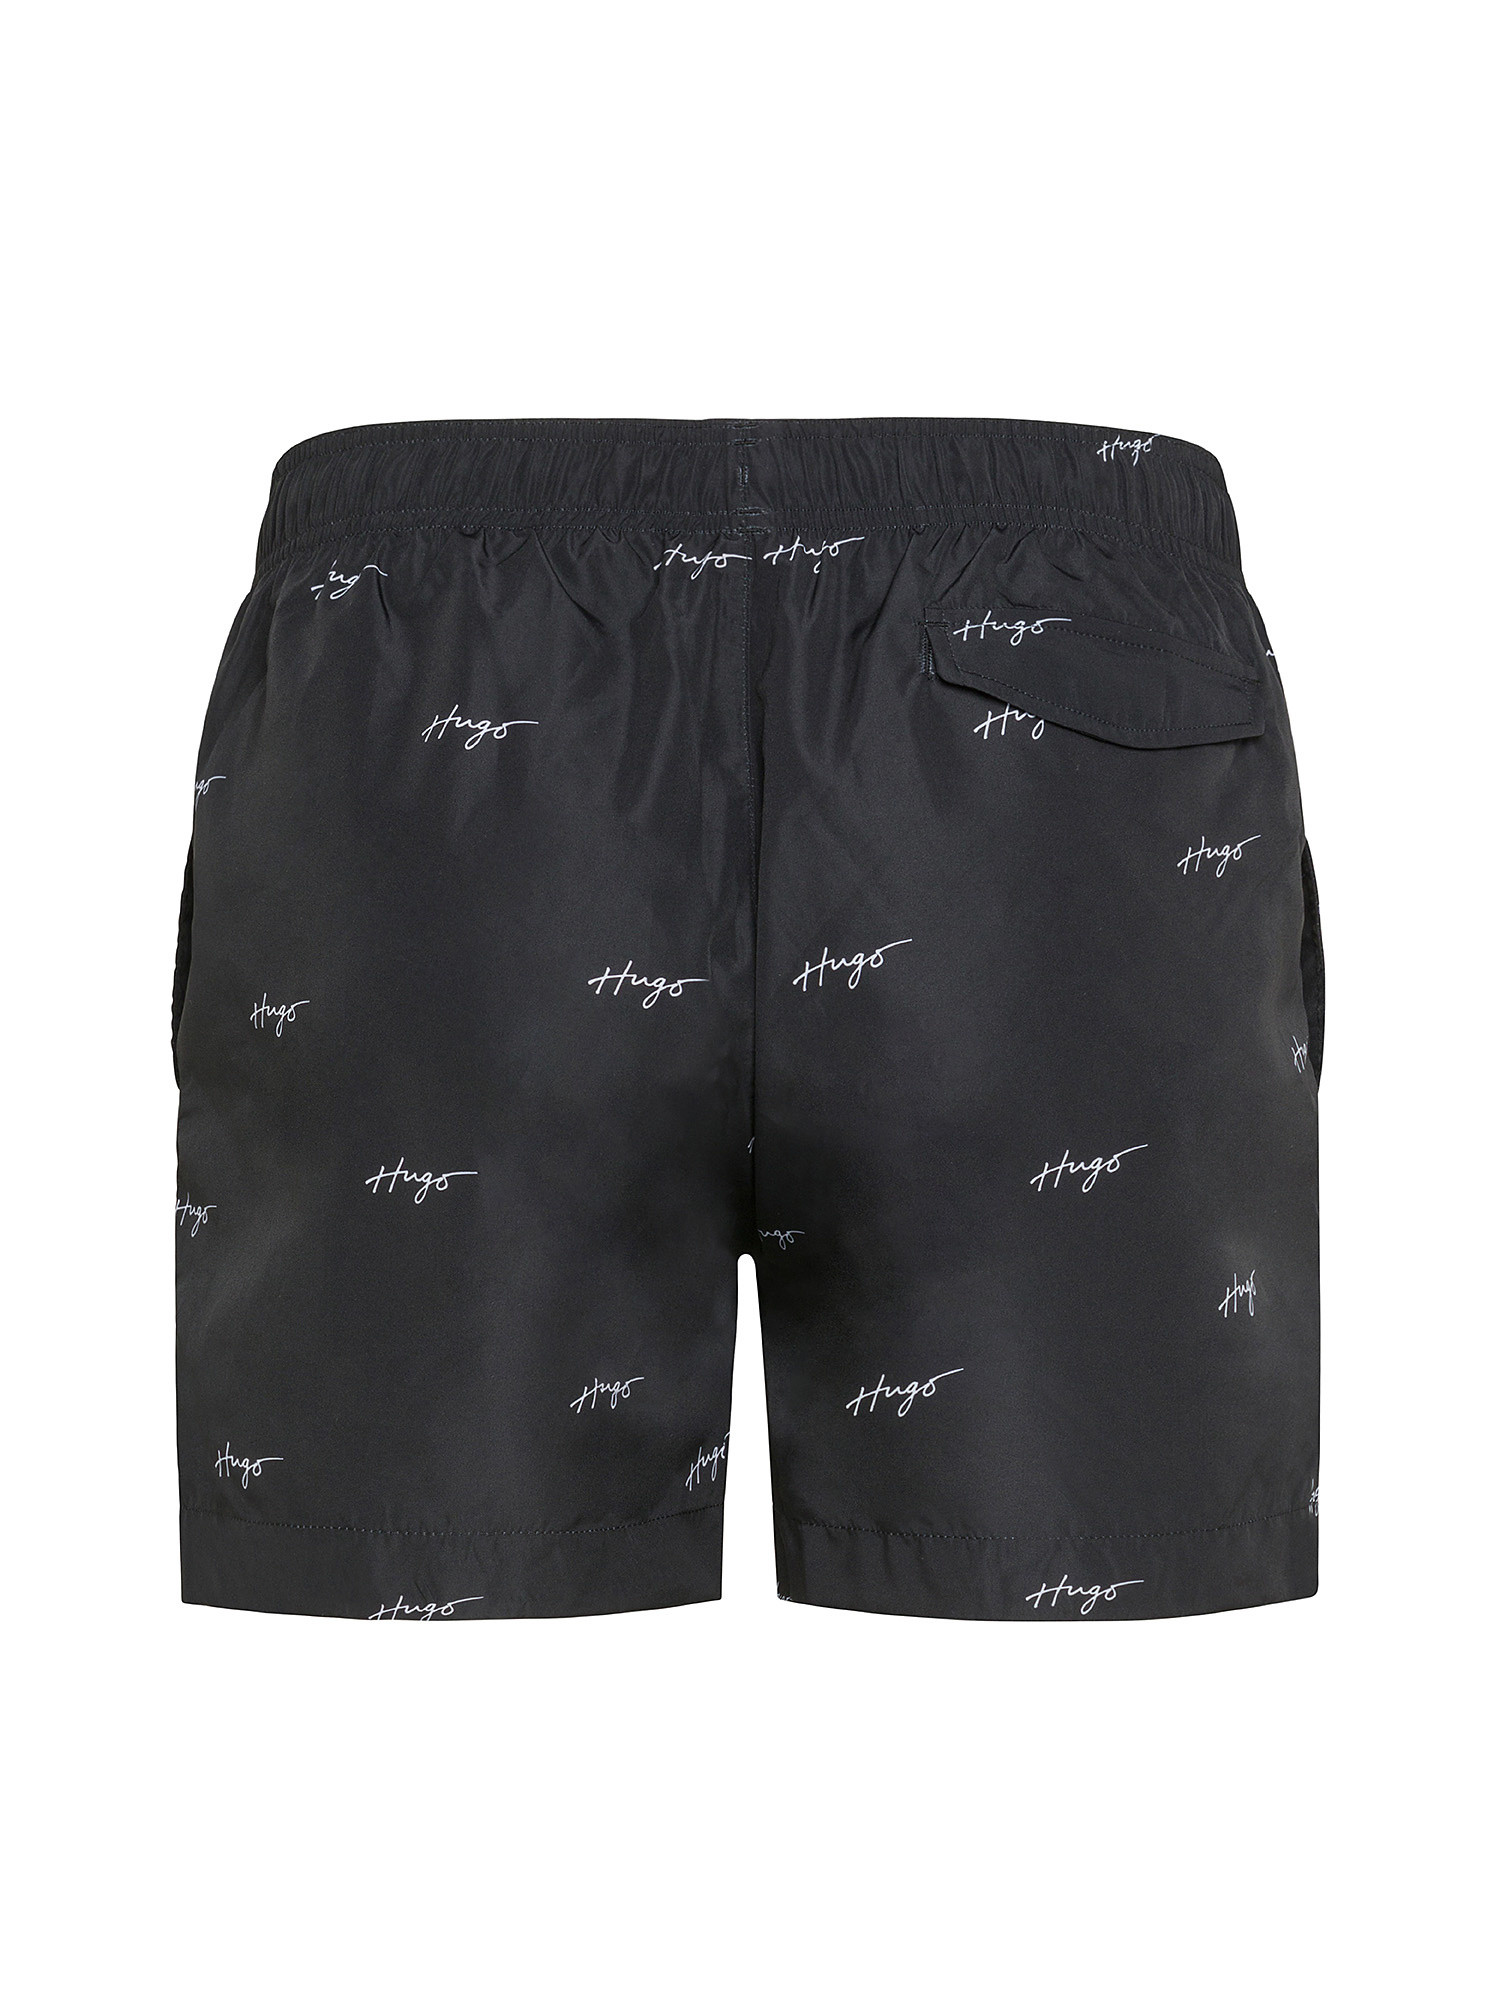 Hugo - Swim boxer in recycled fabric with logo, Black, large image number 1